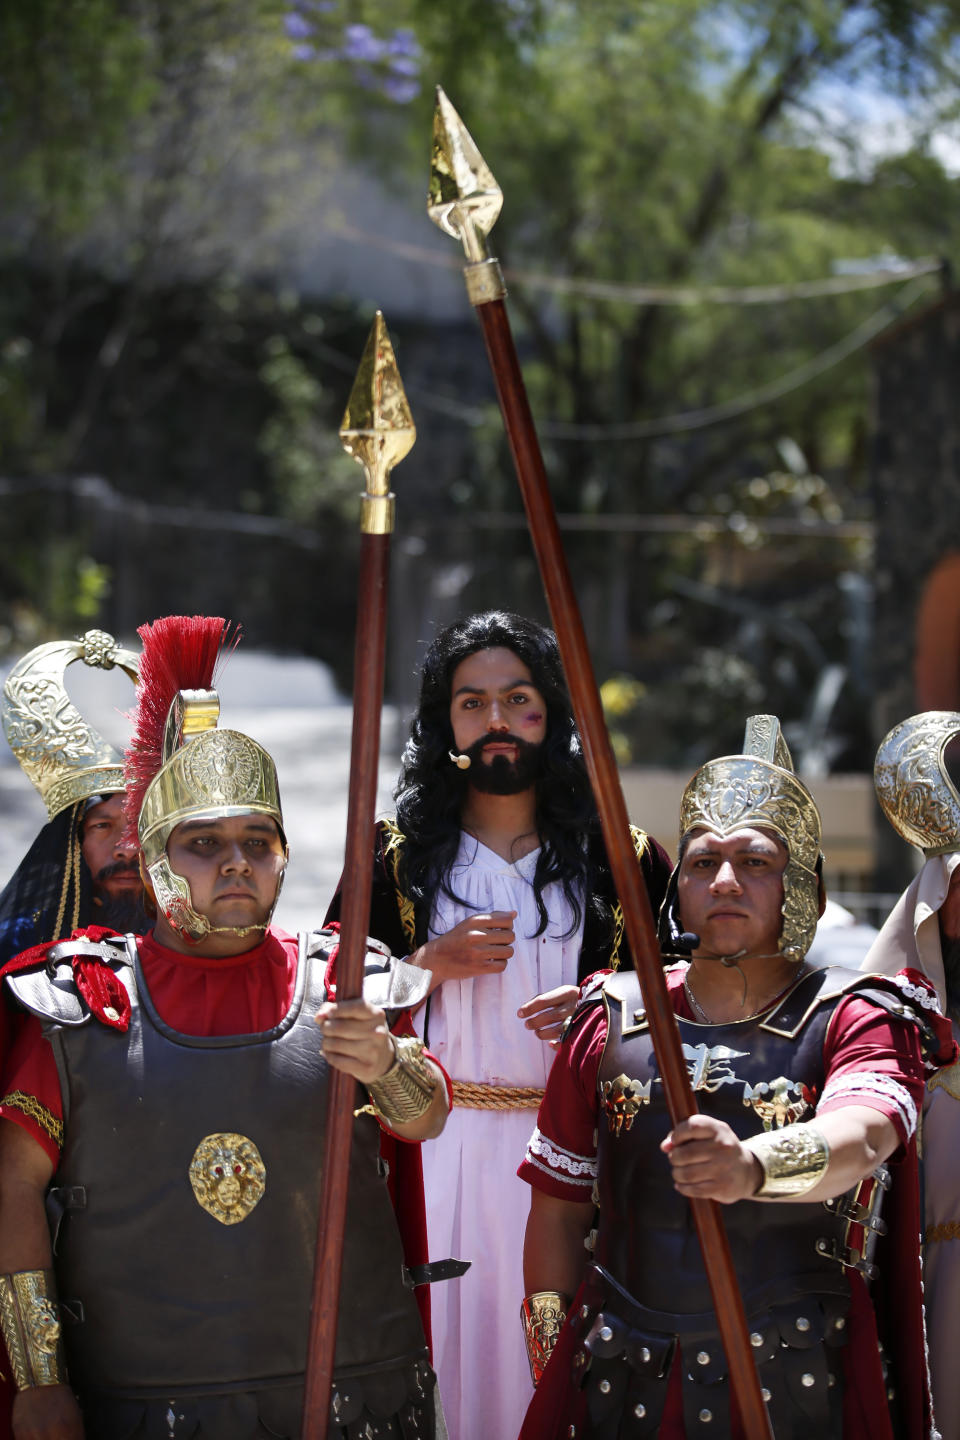 Men dressed as Roman soldiers escort Brando Neri Luna in the role of Jesus Christ during the Passion Play of Iztapalapa, outside the Cathedral, on the outskirts of Mexico City, Friday, April 2, 2021, amid the new coronavirus pandemic. To help prevent the spread of the COVID-19, Latin America's most famous re-enactment of the crucifixion of Christ was closed to the public and transmitted live so people could watch at home, for a second consecutive year. (AP Photo/Marco Ugarte)